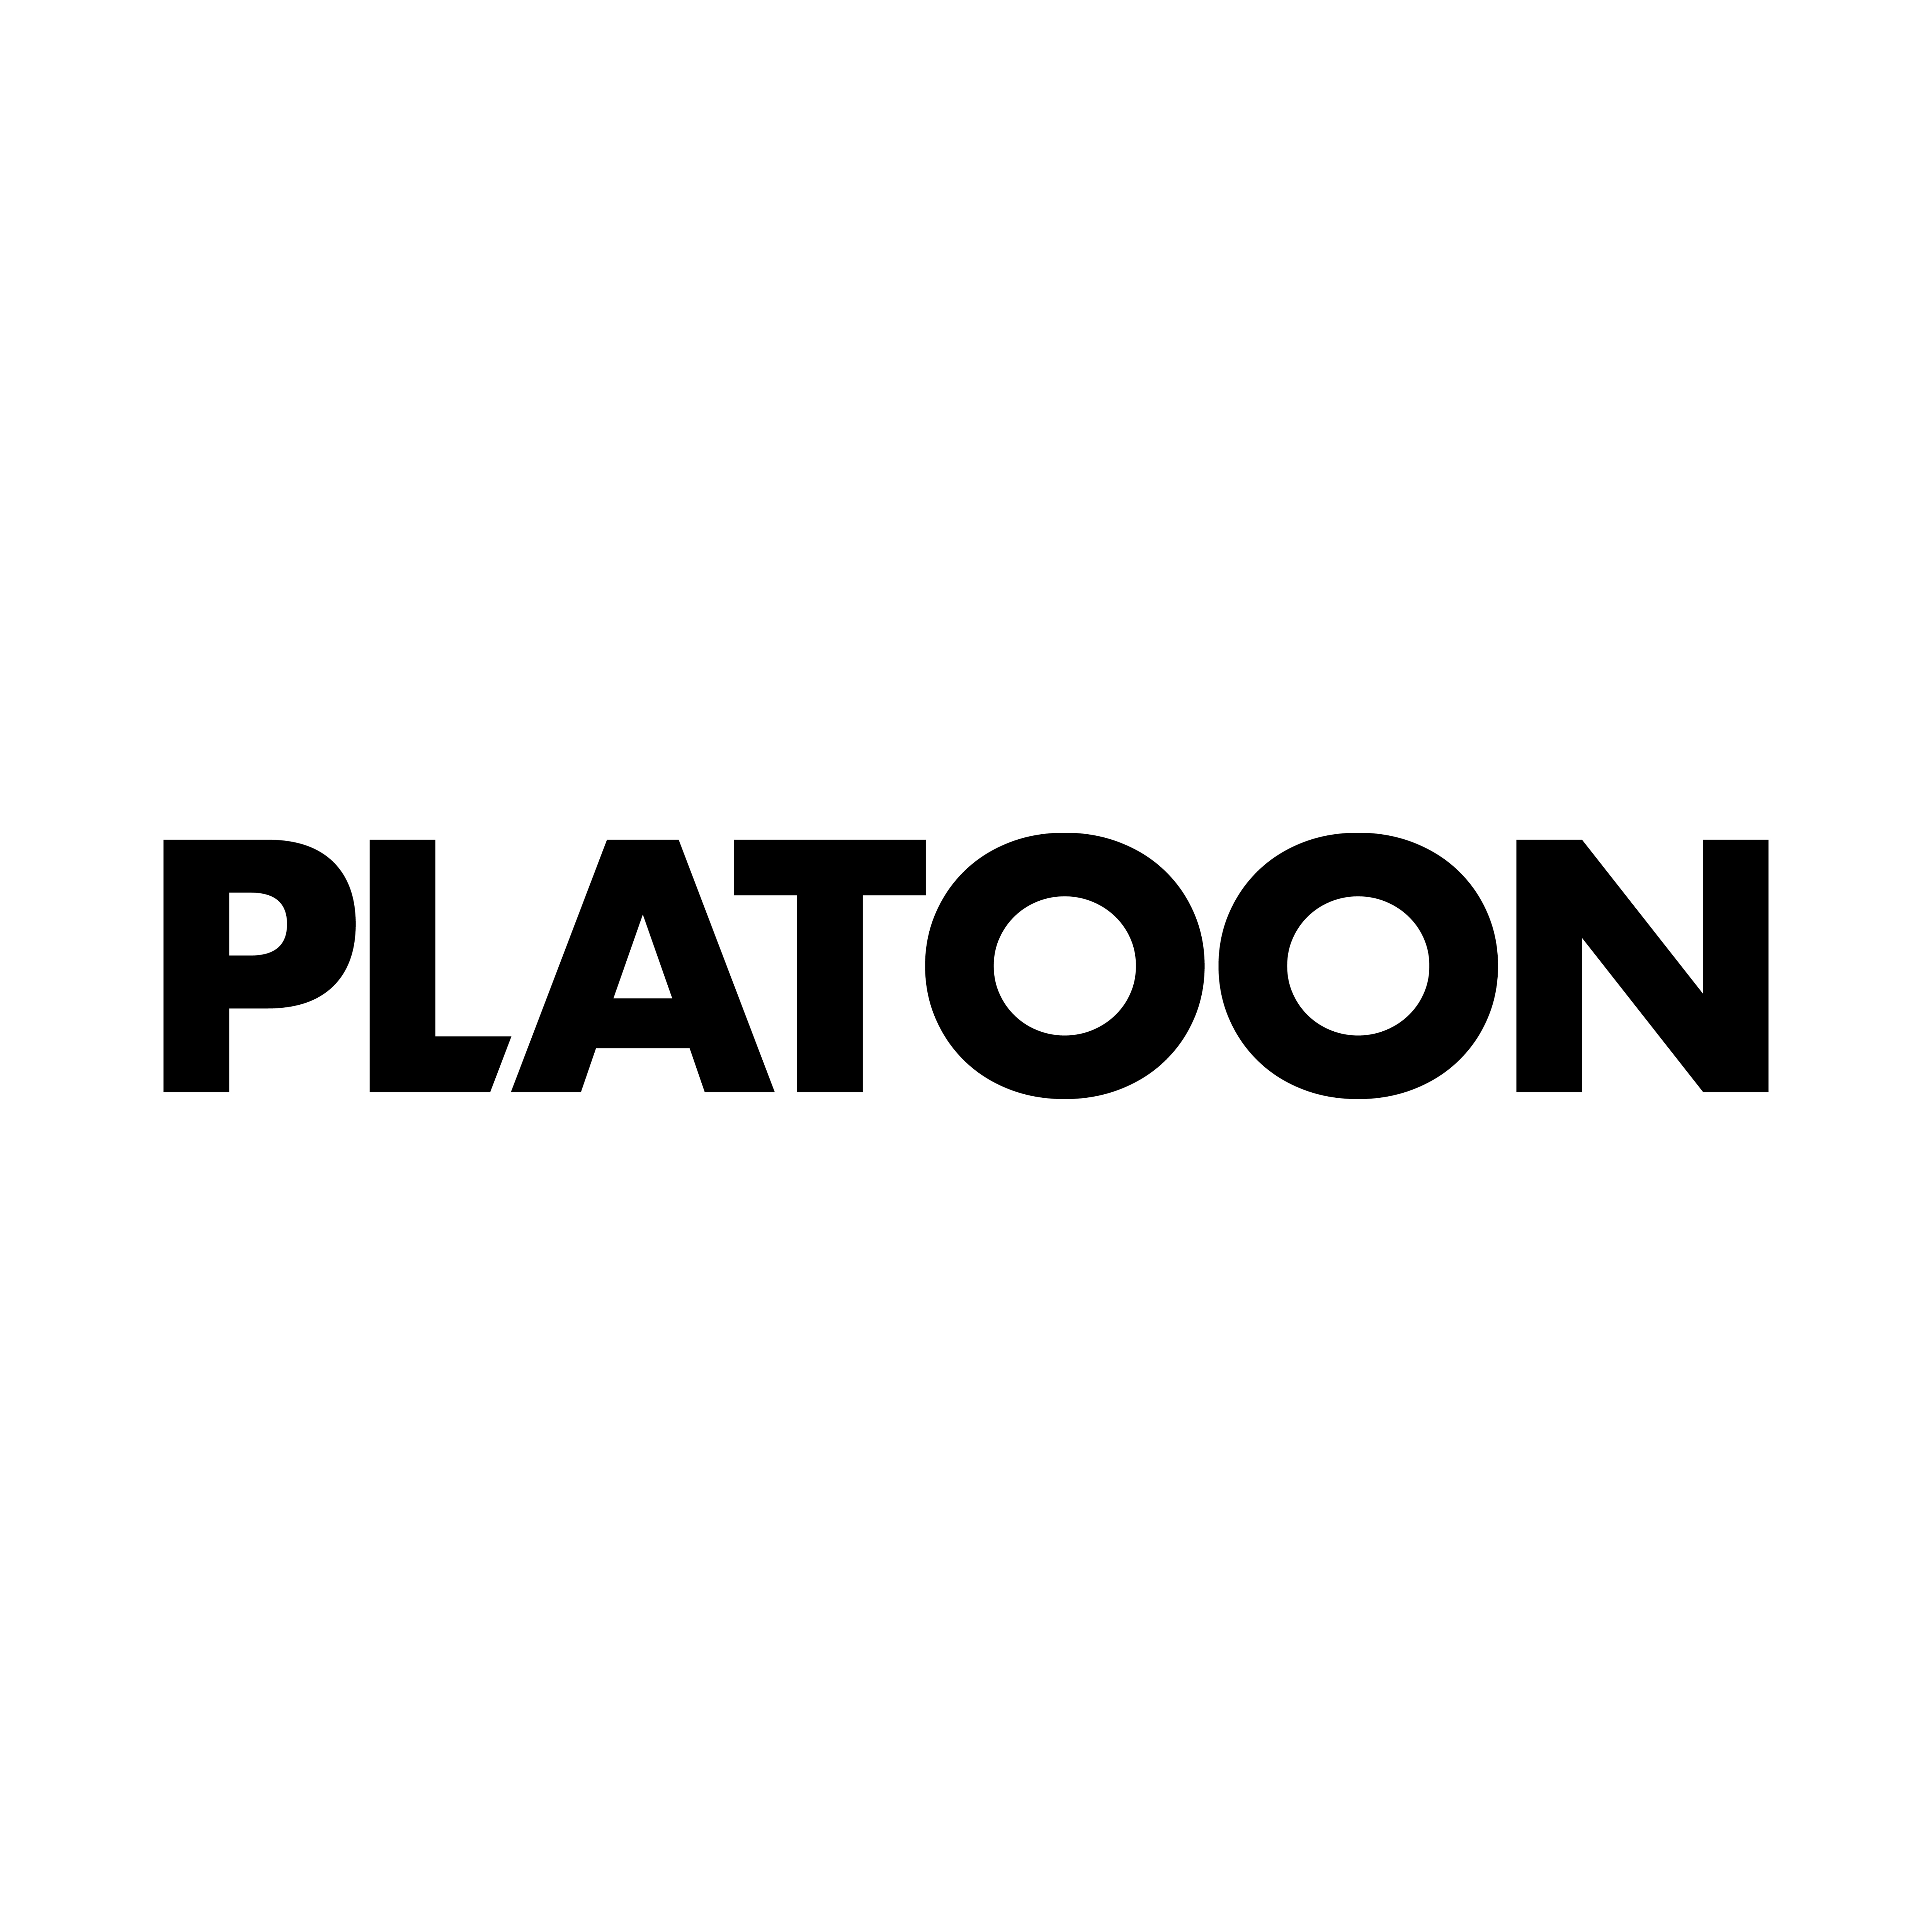 You are currently viewing Platoon